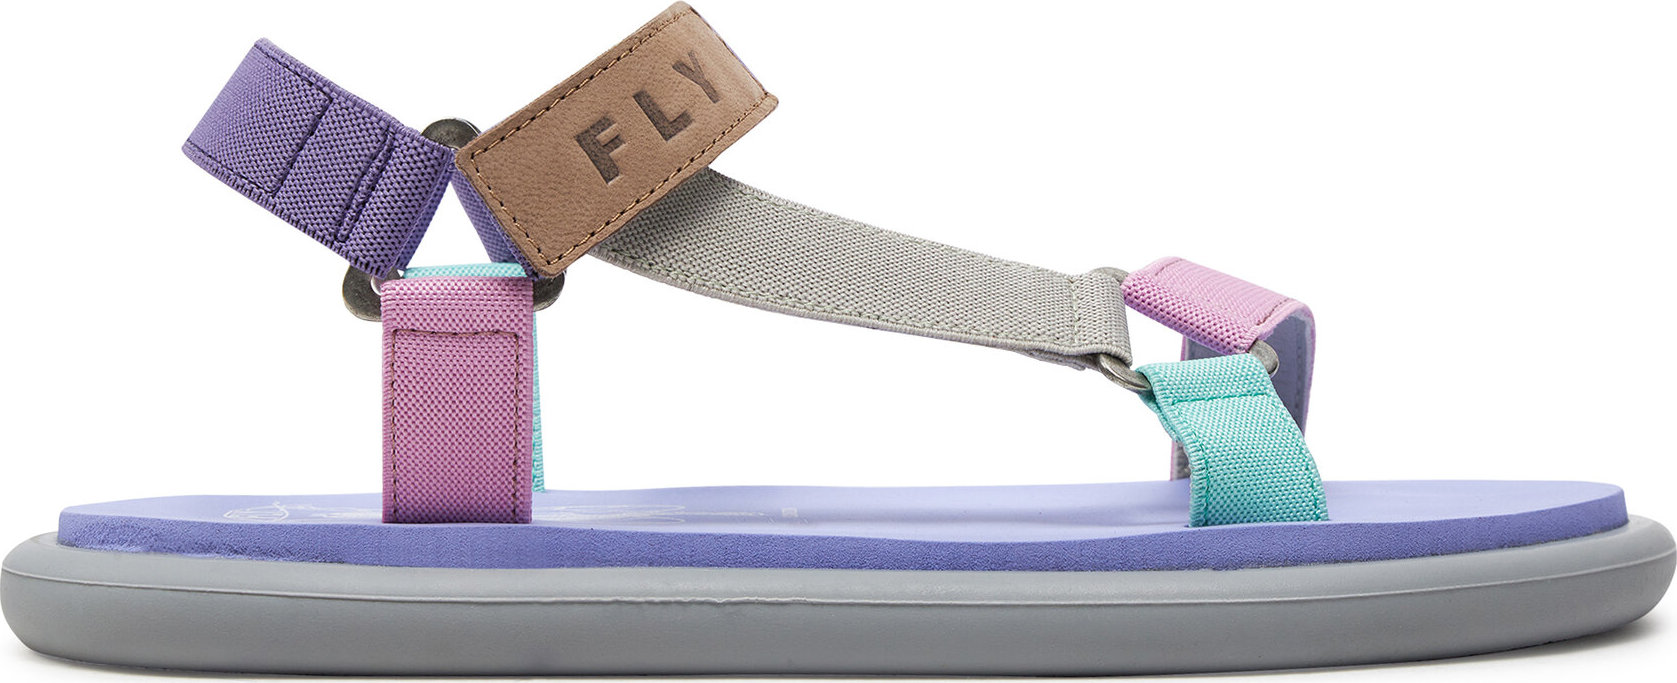 Sandály Fly London Oliefly P145072000 Concrete/Multicolor/Violet